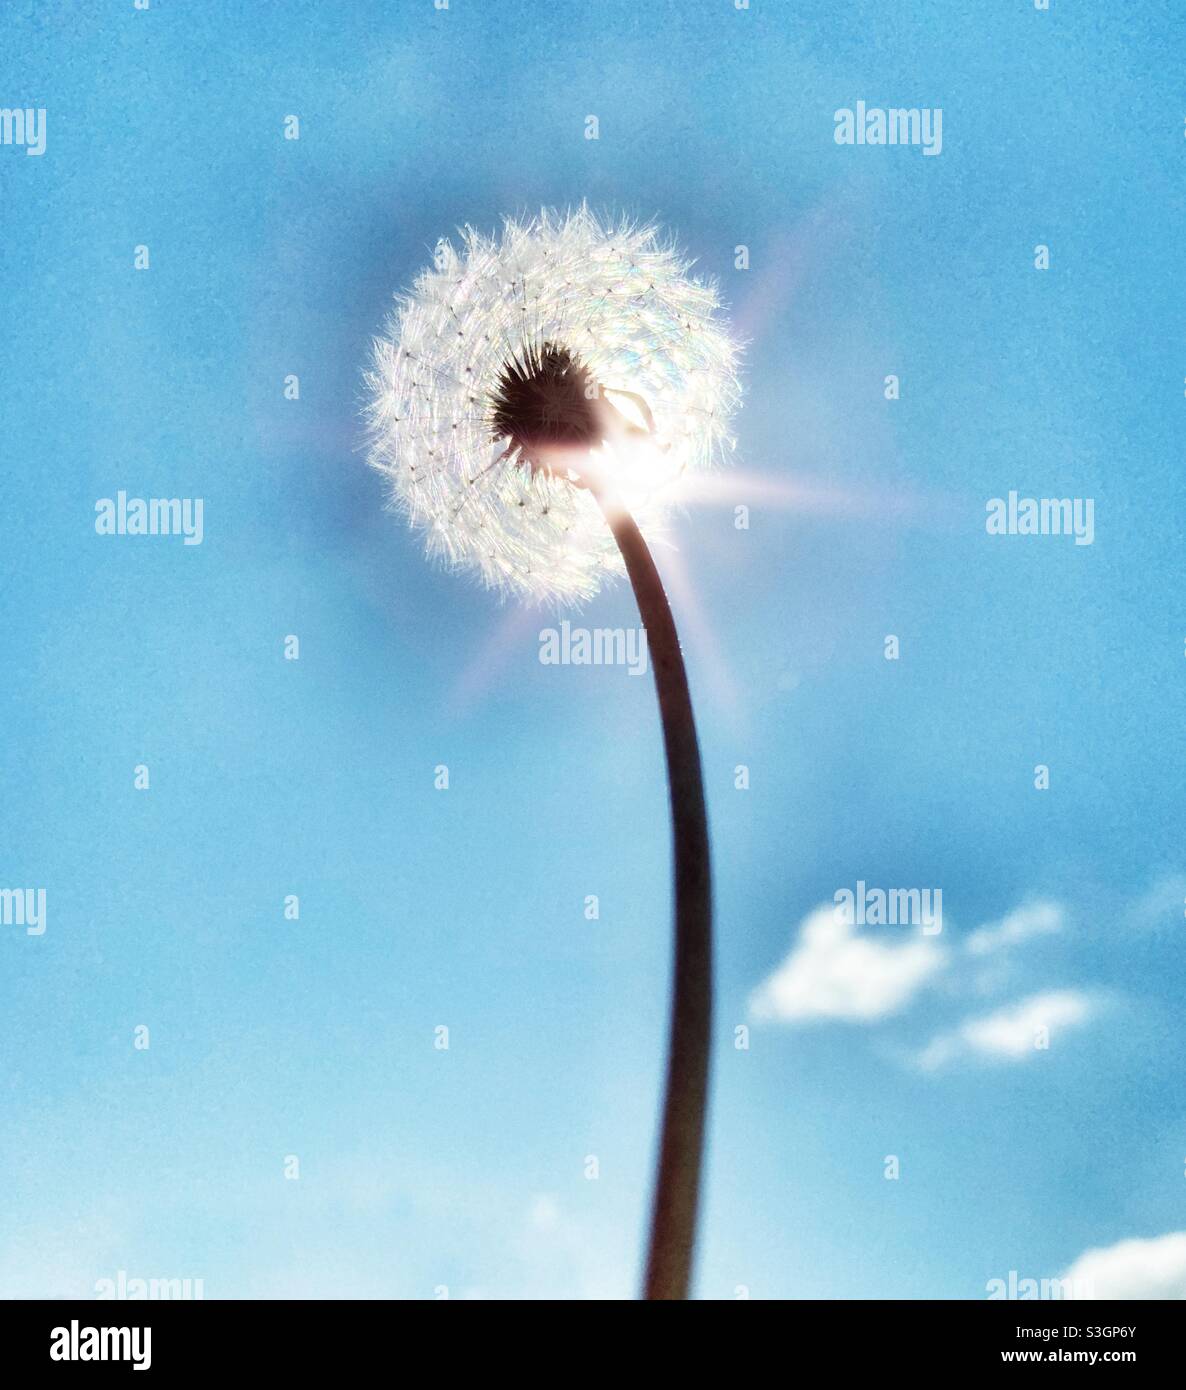 Dandelion seed head from low angle against sun and blue sky Stock Photo